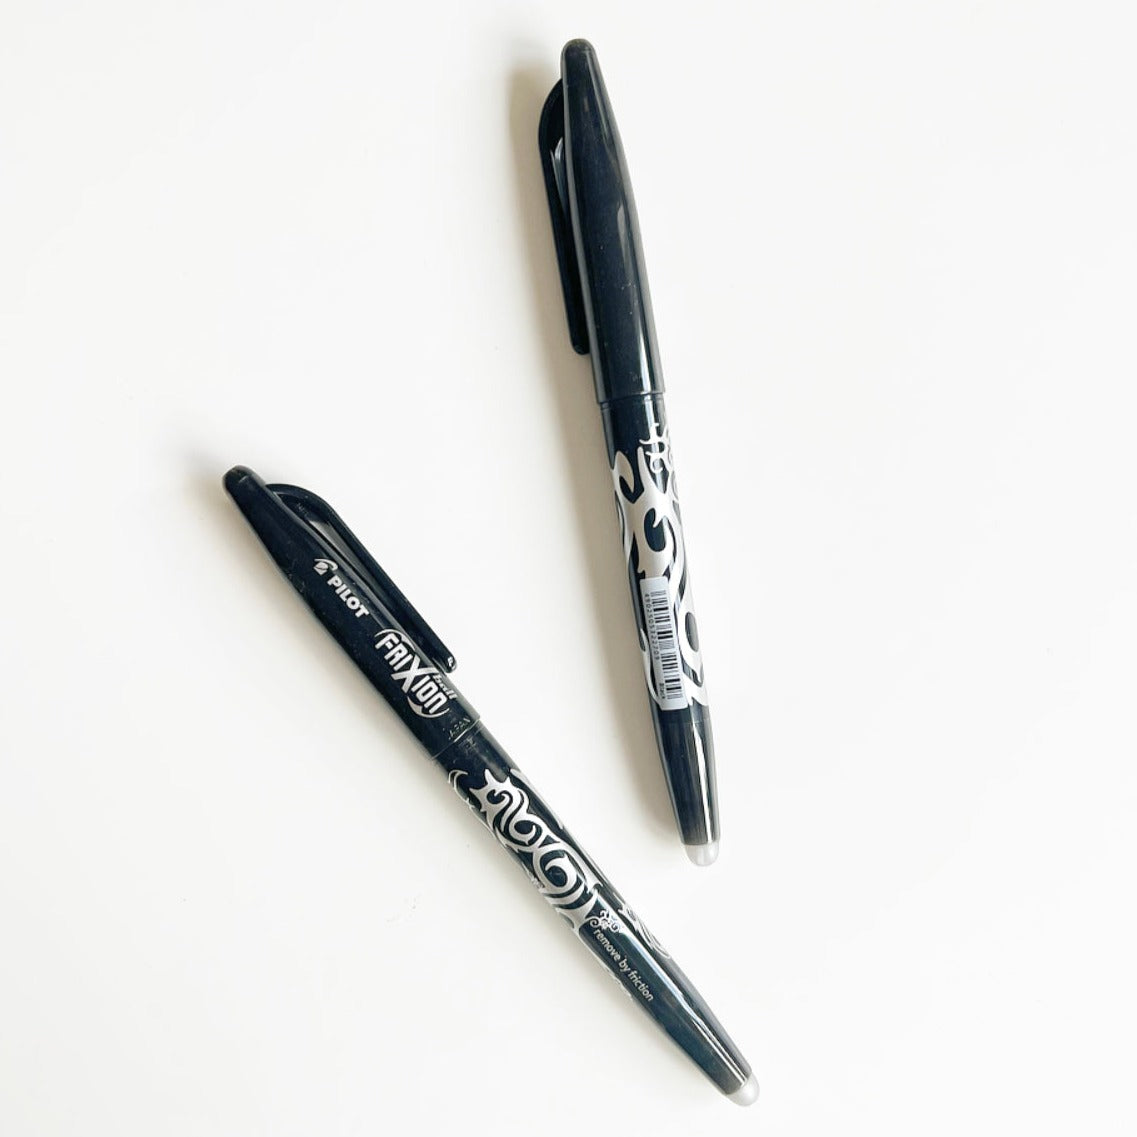 Frixion Tracing Pens